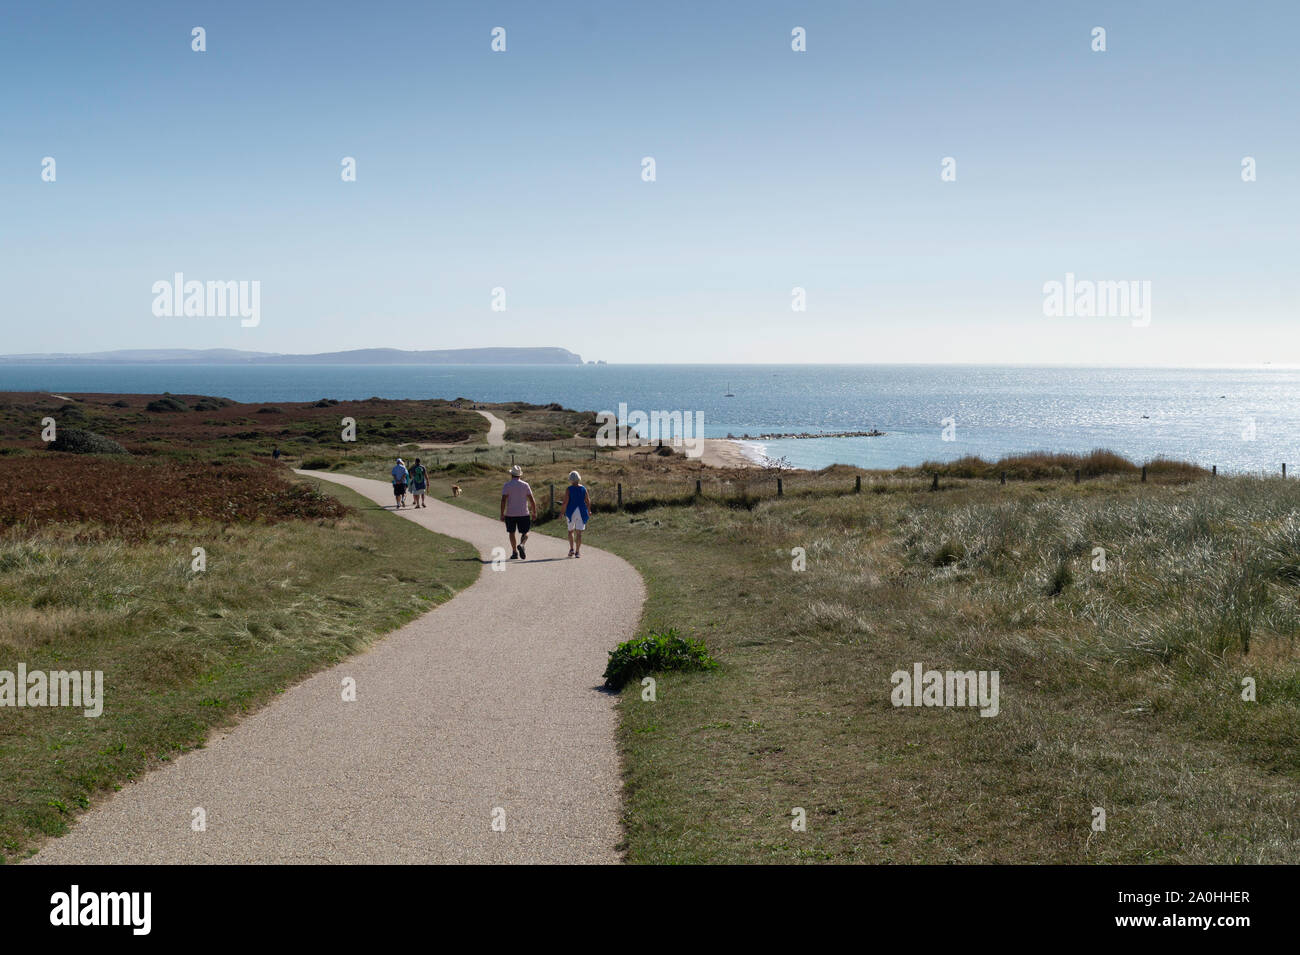 The Isle of Wight viewed from Hengistbury Head, with walkers in the foreground enjoying the late summer sunshine and stunning views. Stock Photo